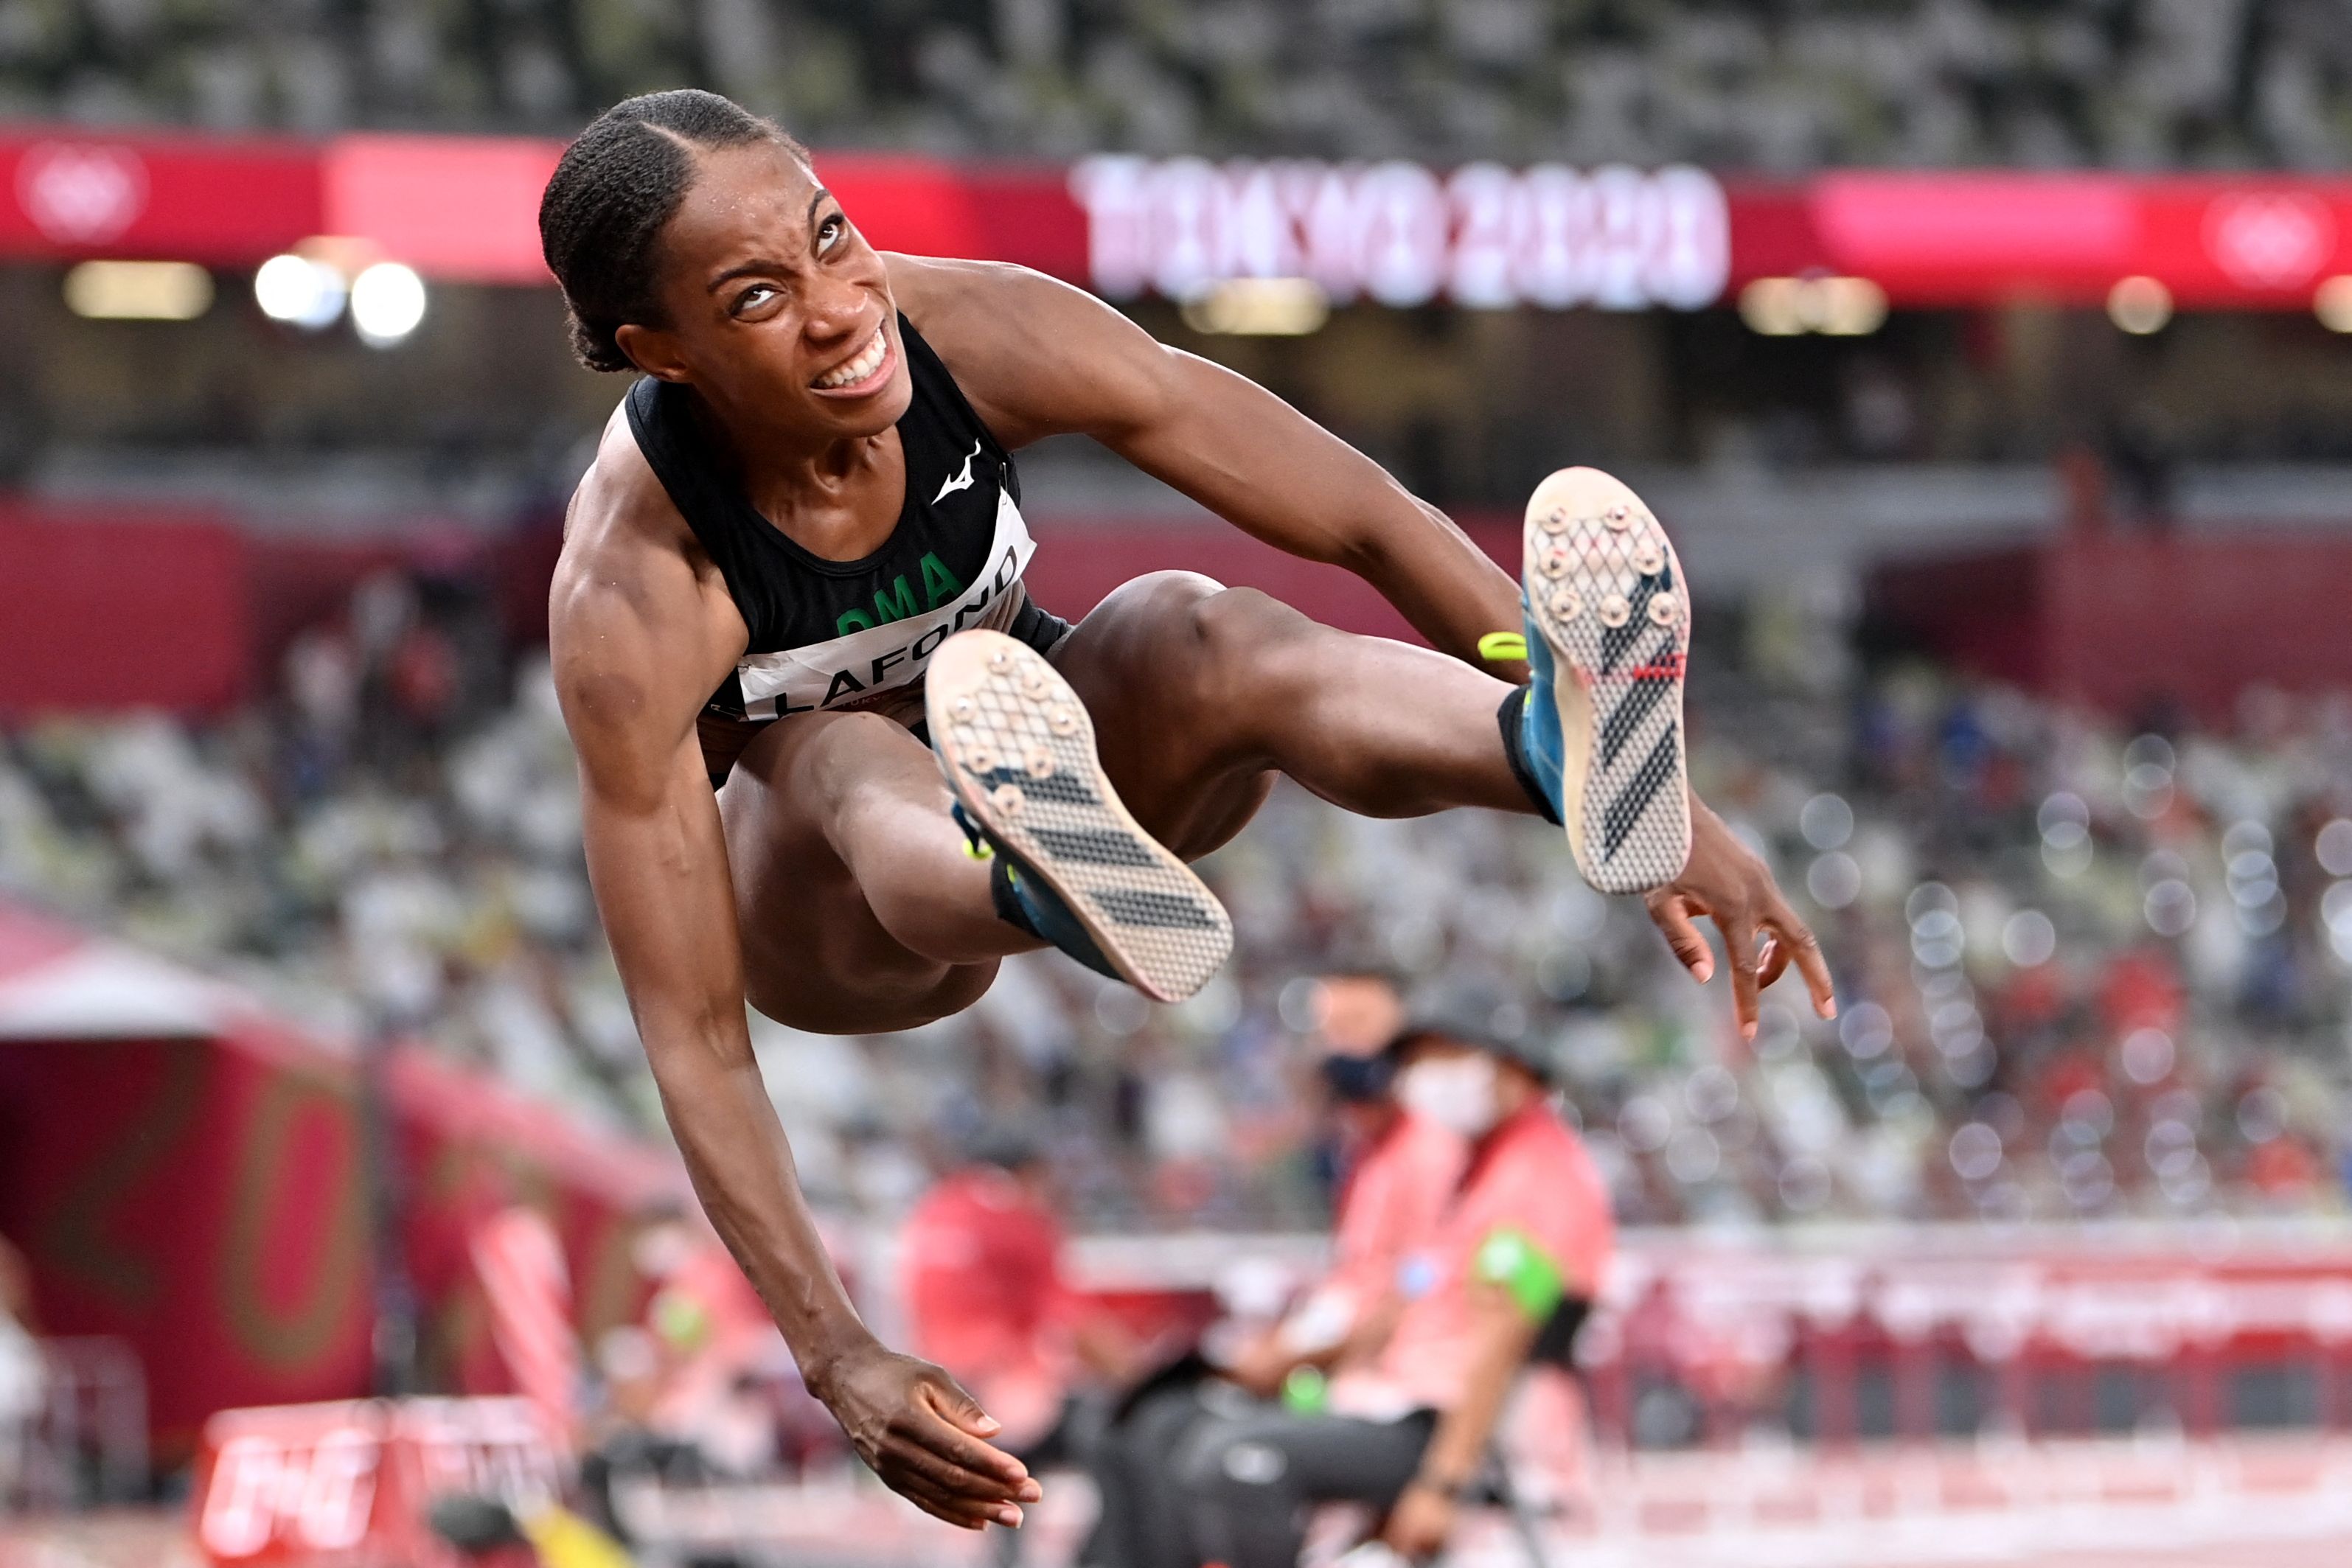 Thea LaFond in the triple jump at the Tokyo Olympic Games